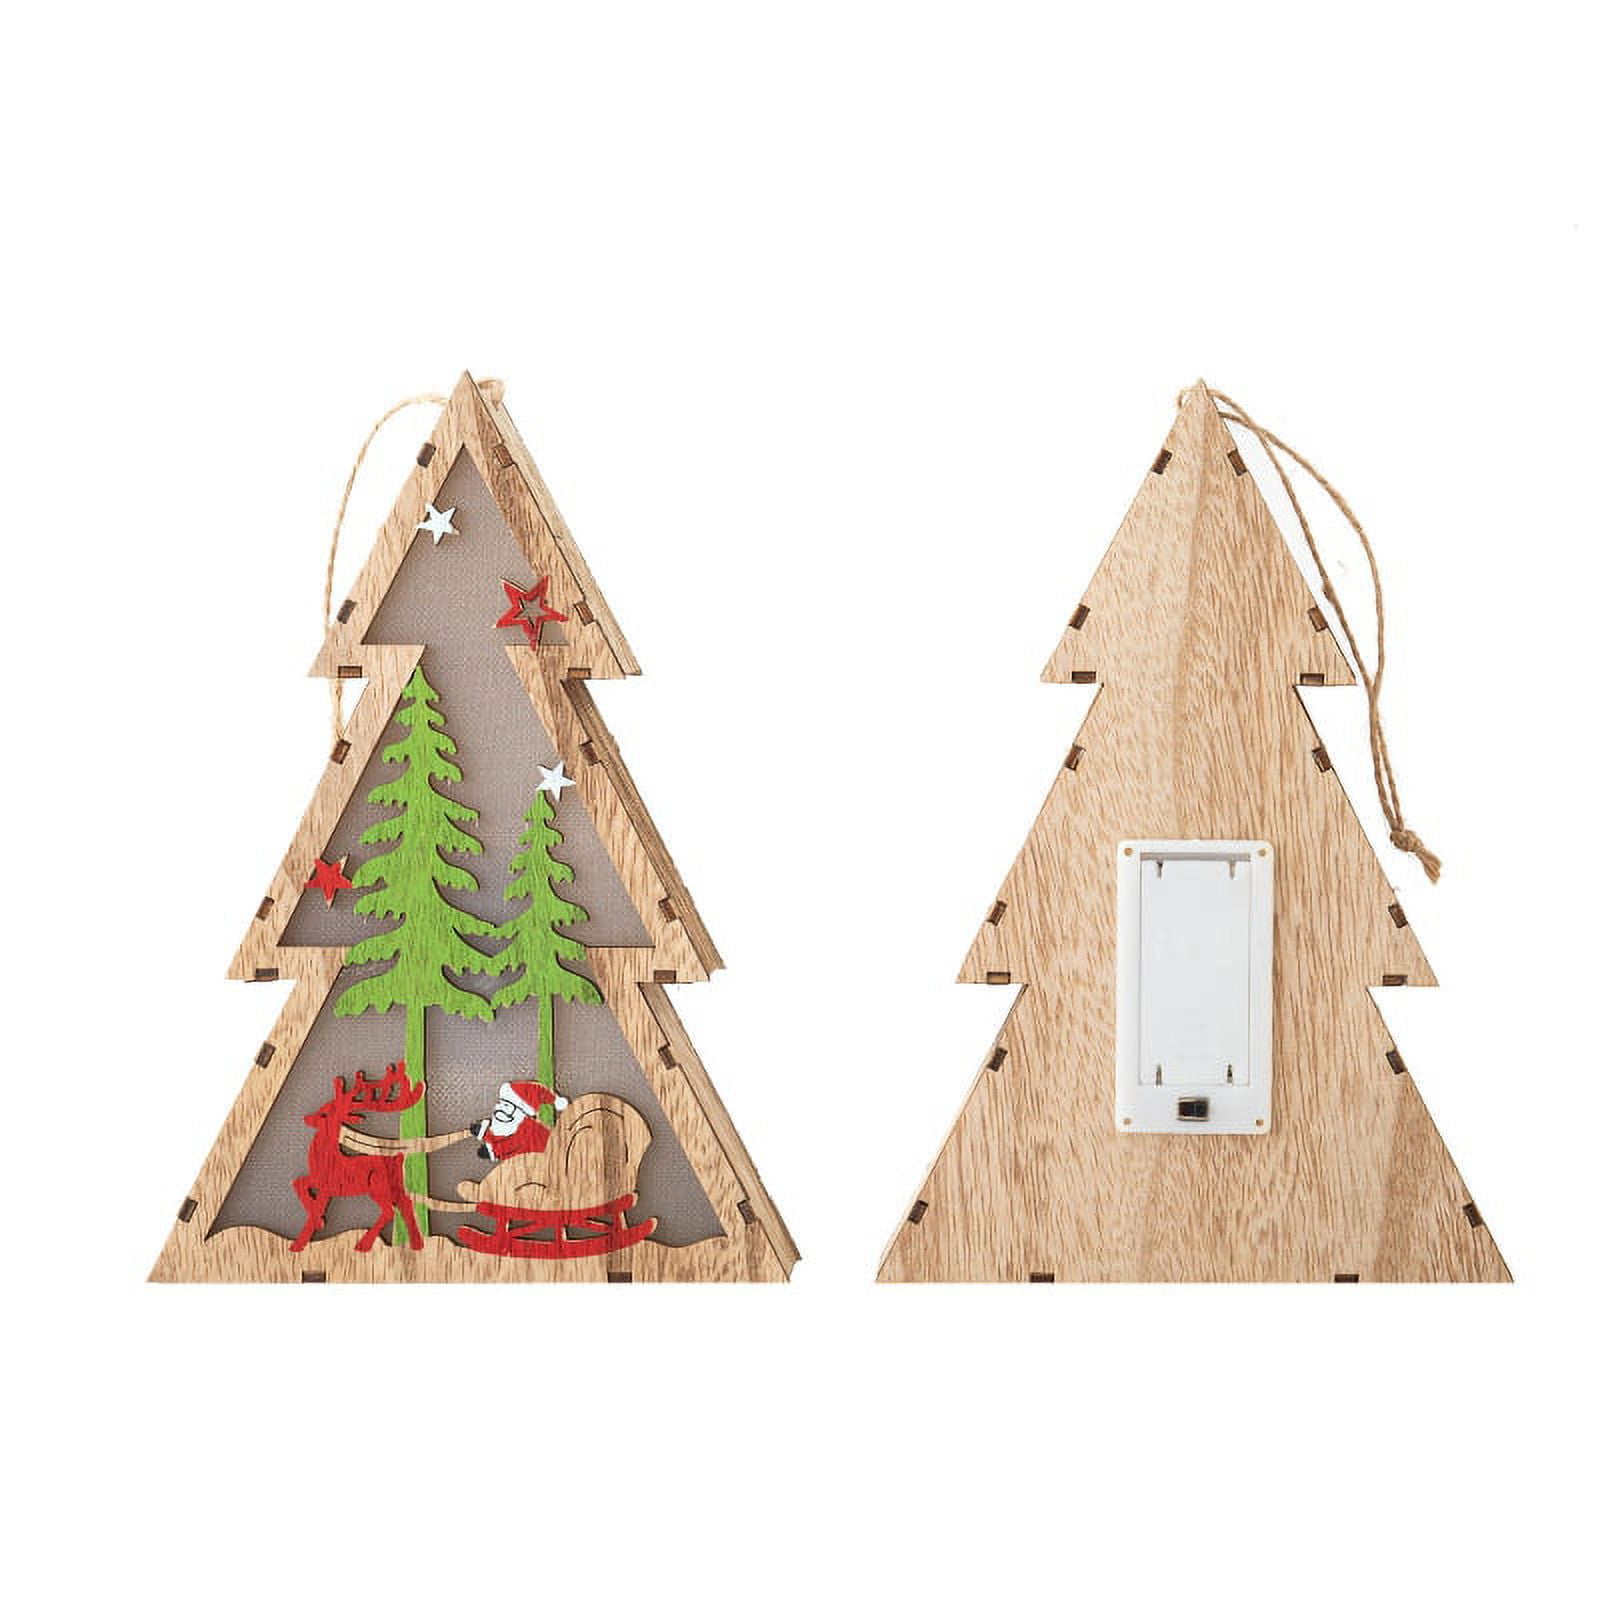  𝟮𝟰 𝗣𝗰𝘀 Christmas Tree Decorations Wooden Hanging